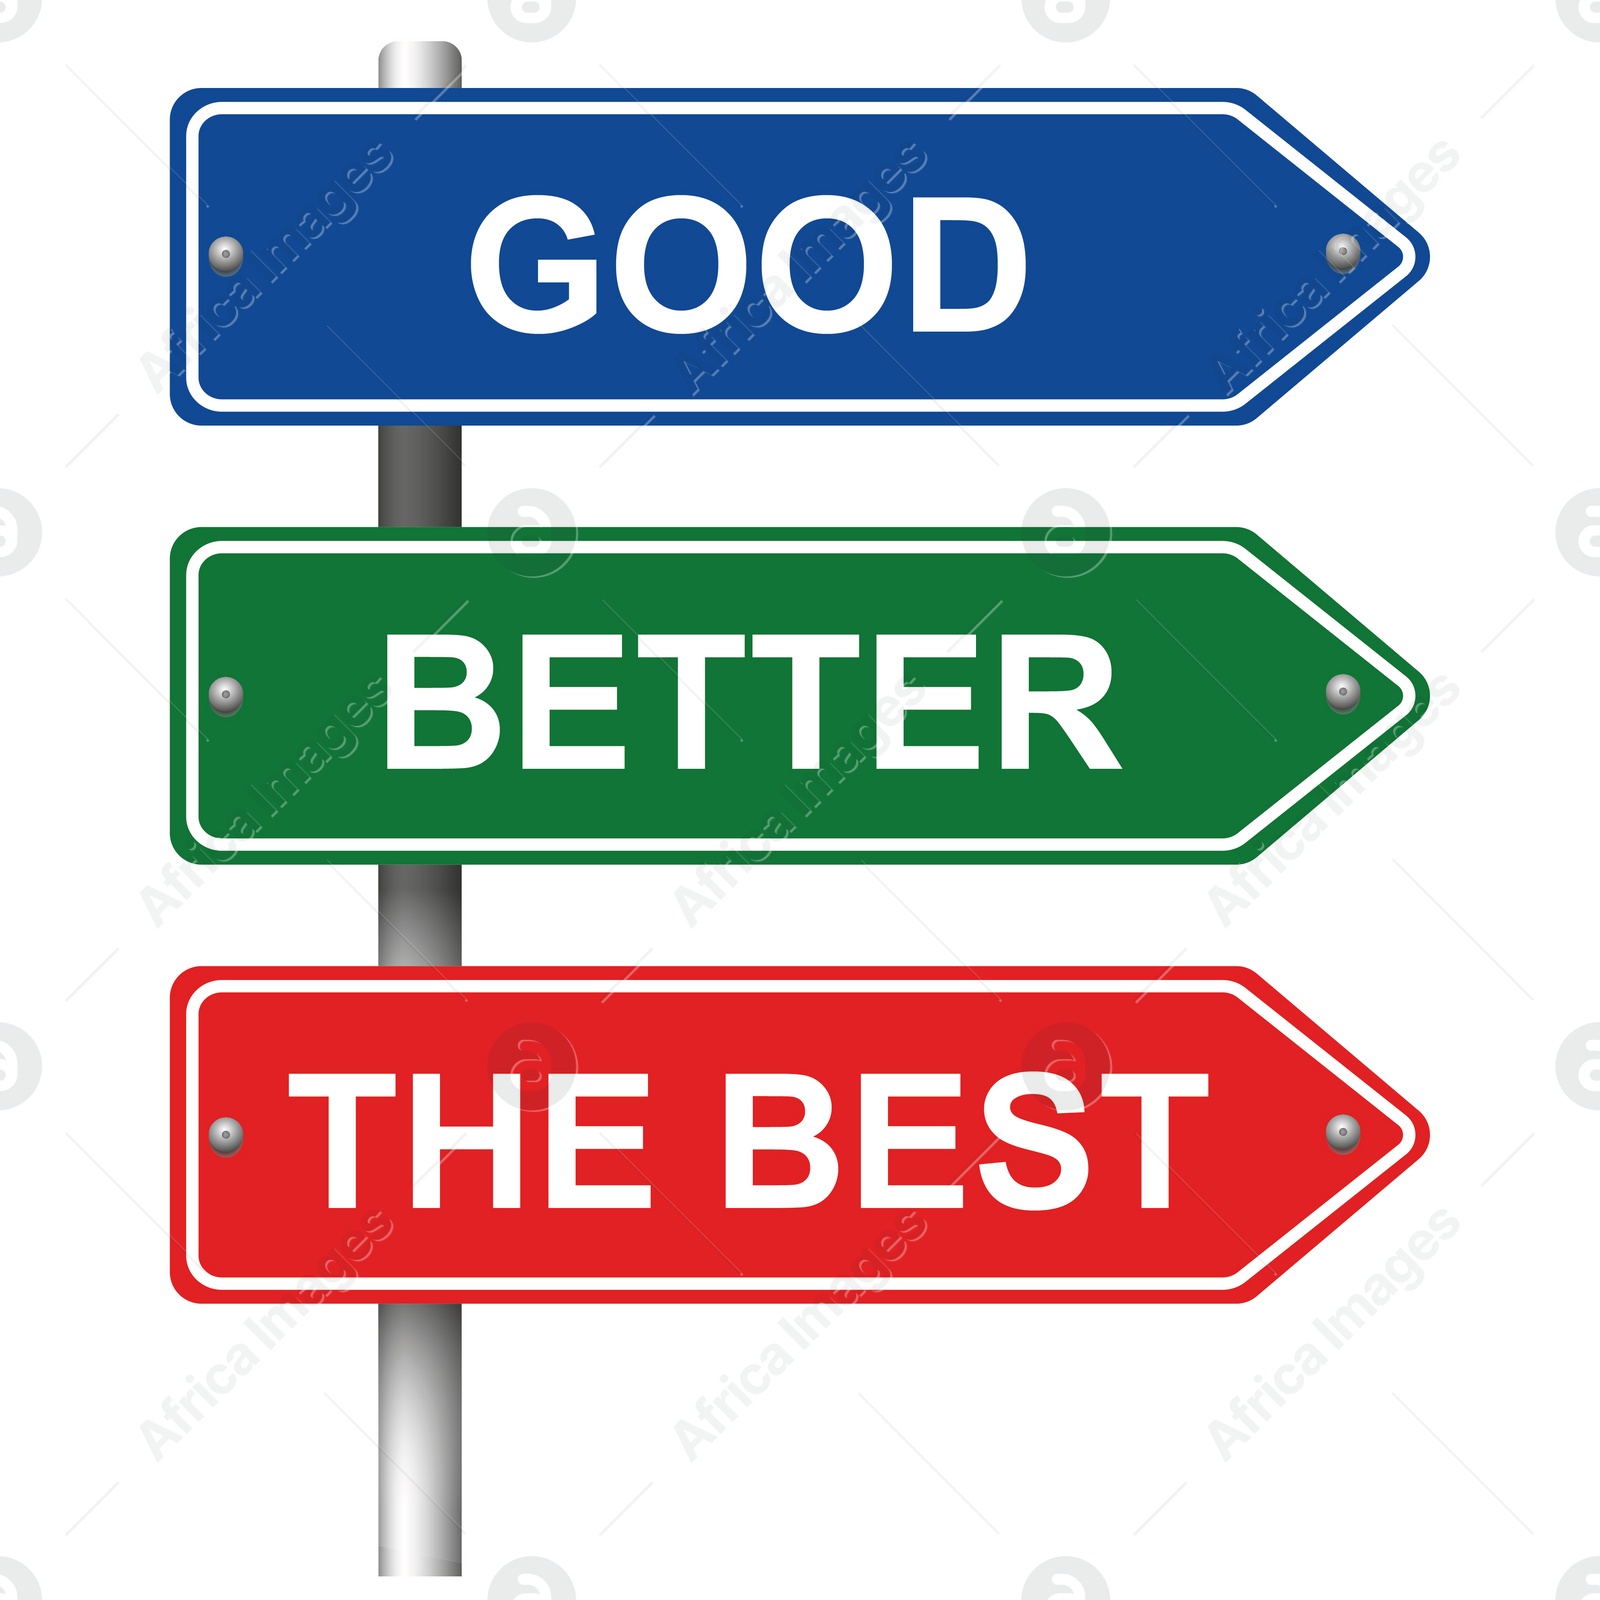 Illustration of Road signpost with words Good, Better, The Best on white background